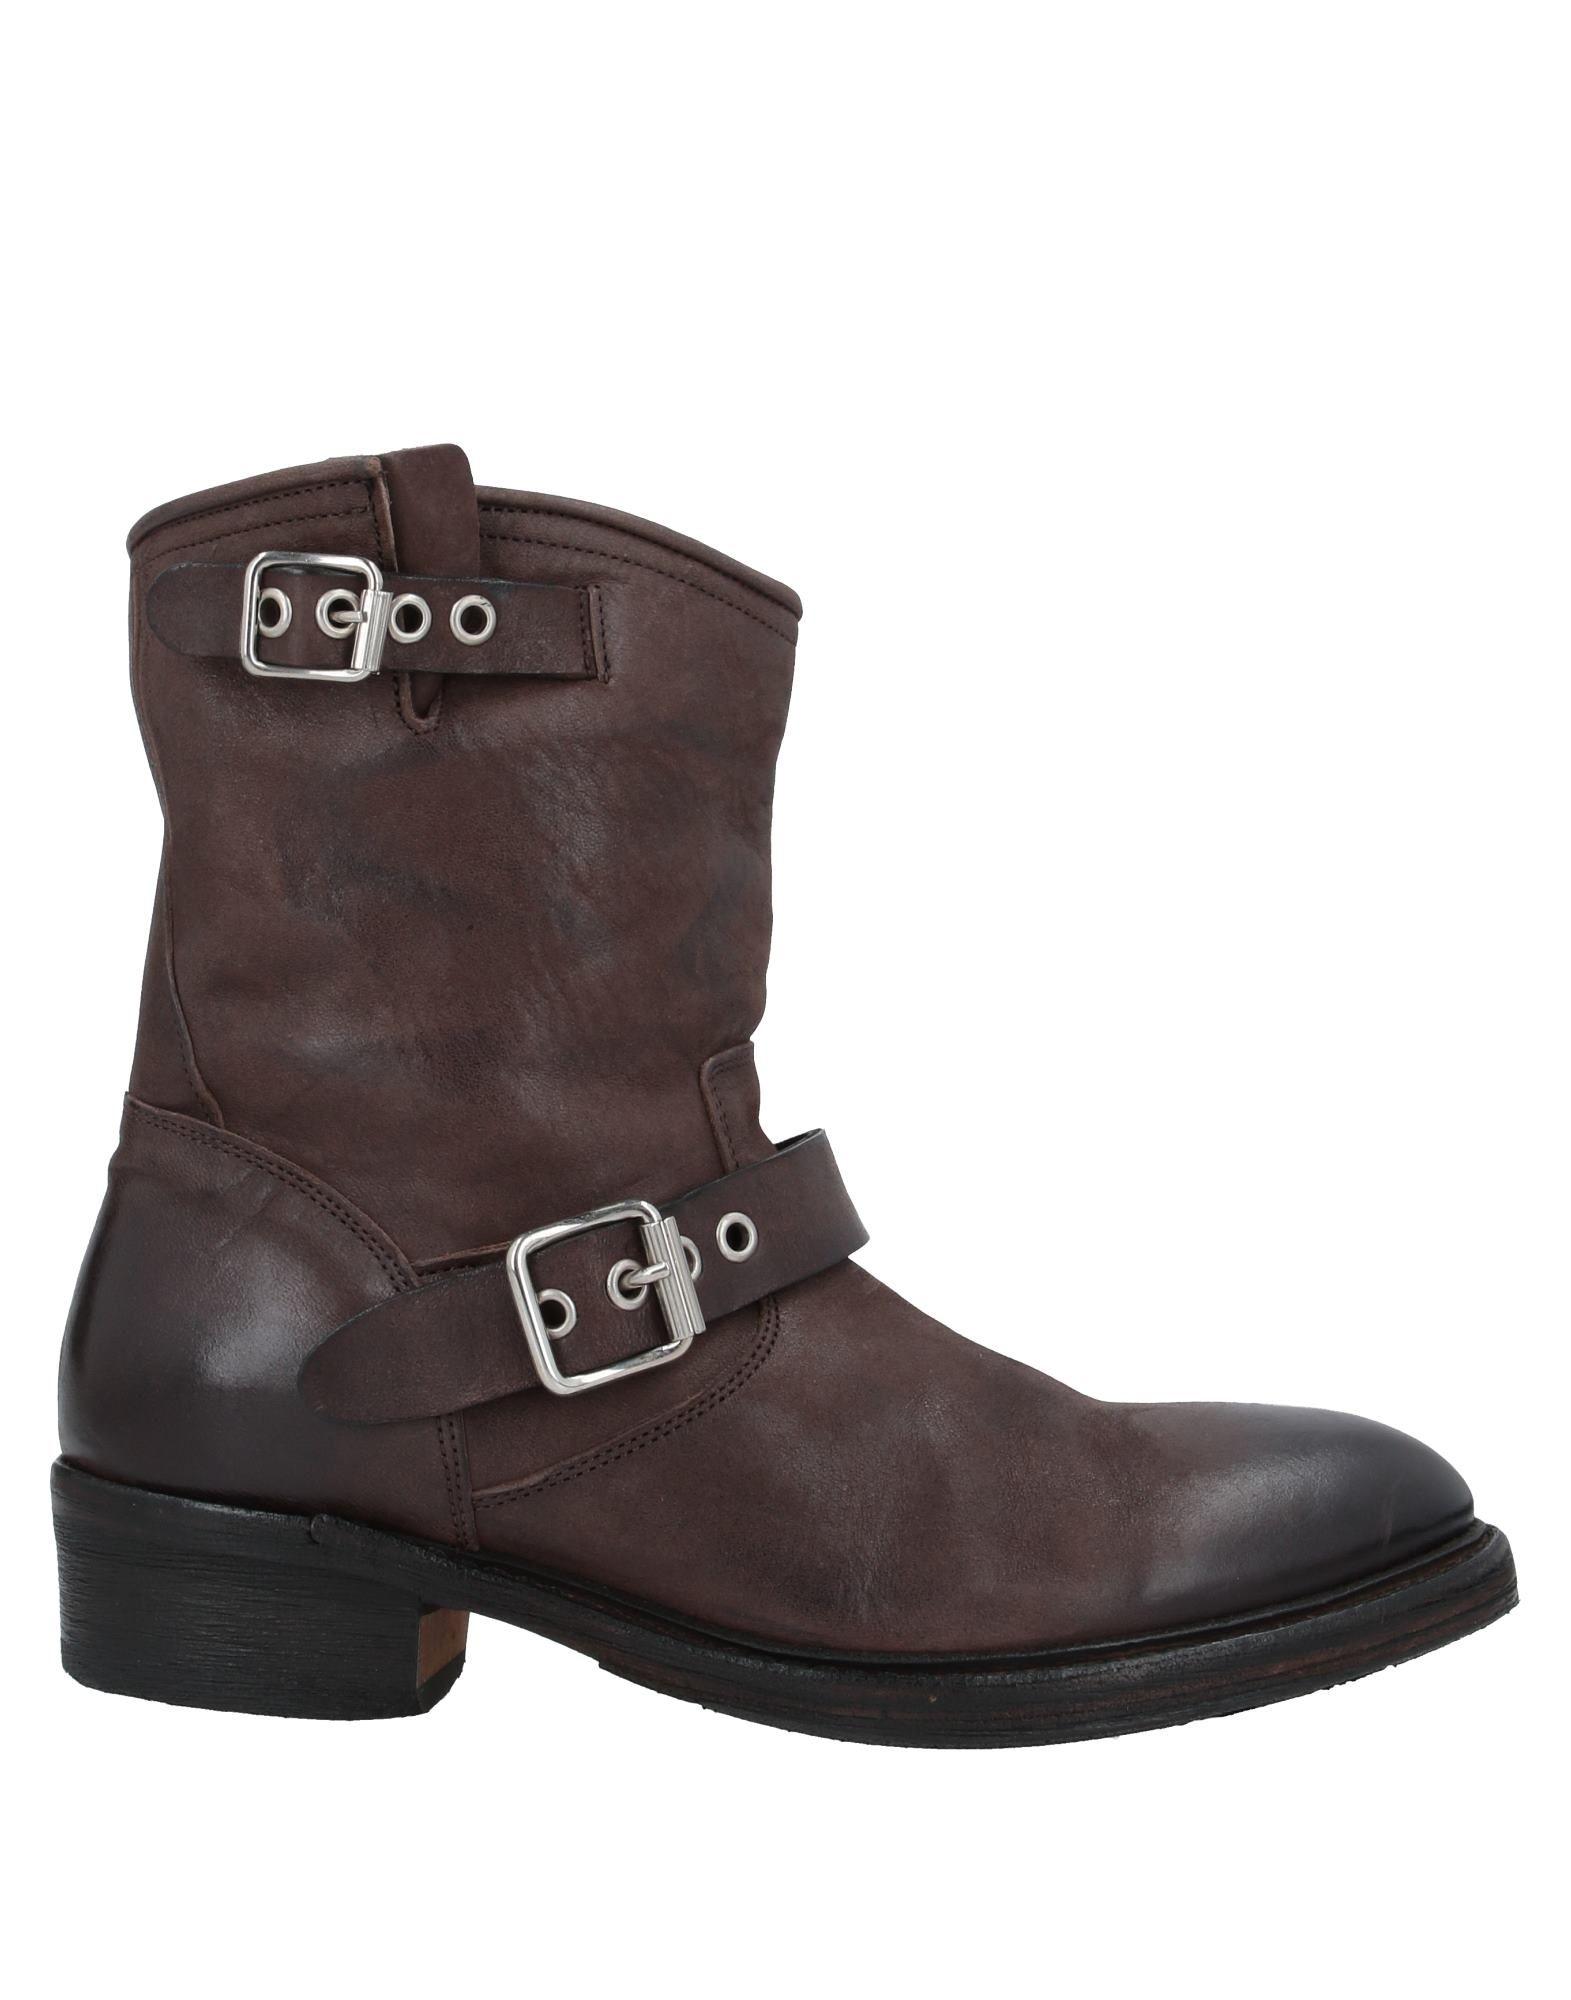 Pantanetti Leather Ankle Boots in Dark Brown (Brown) - Lyst